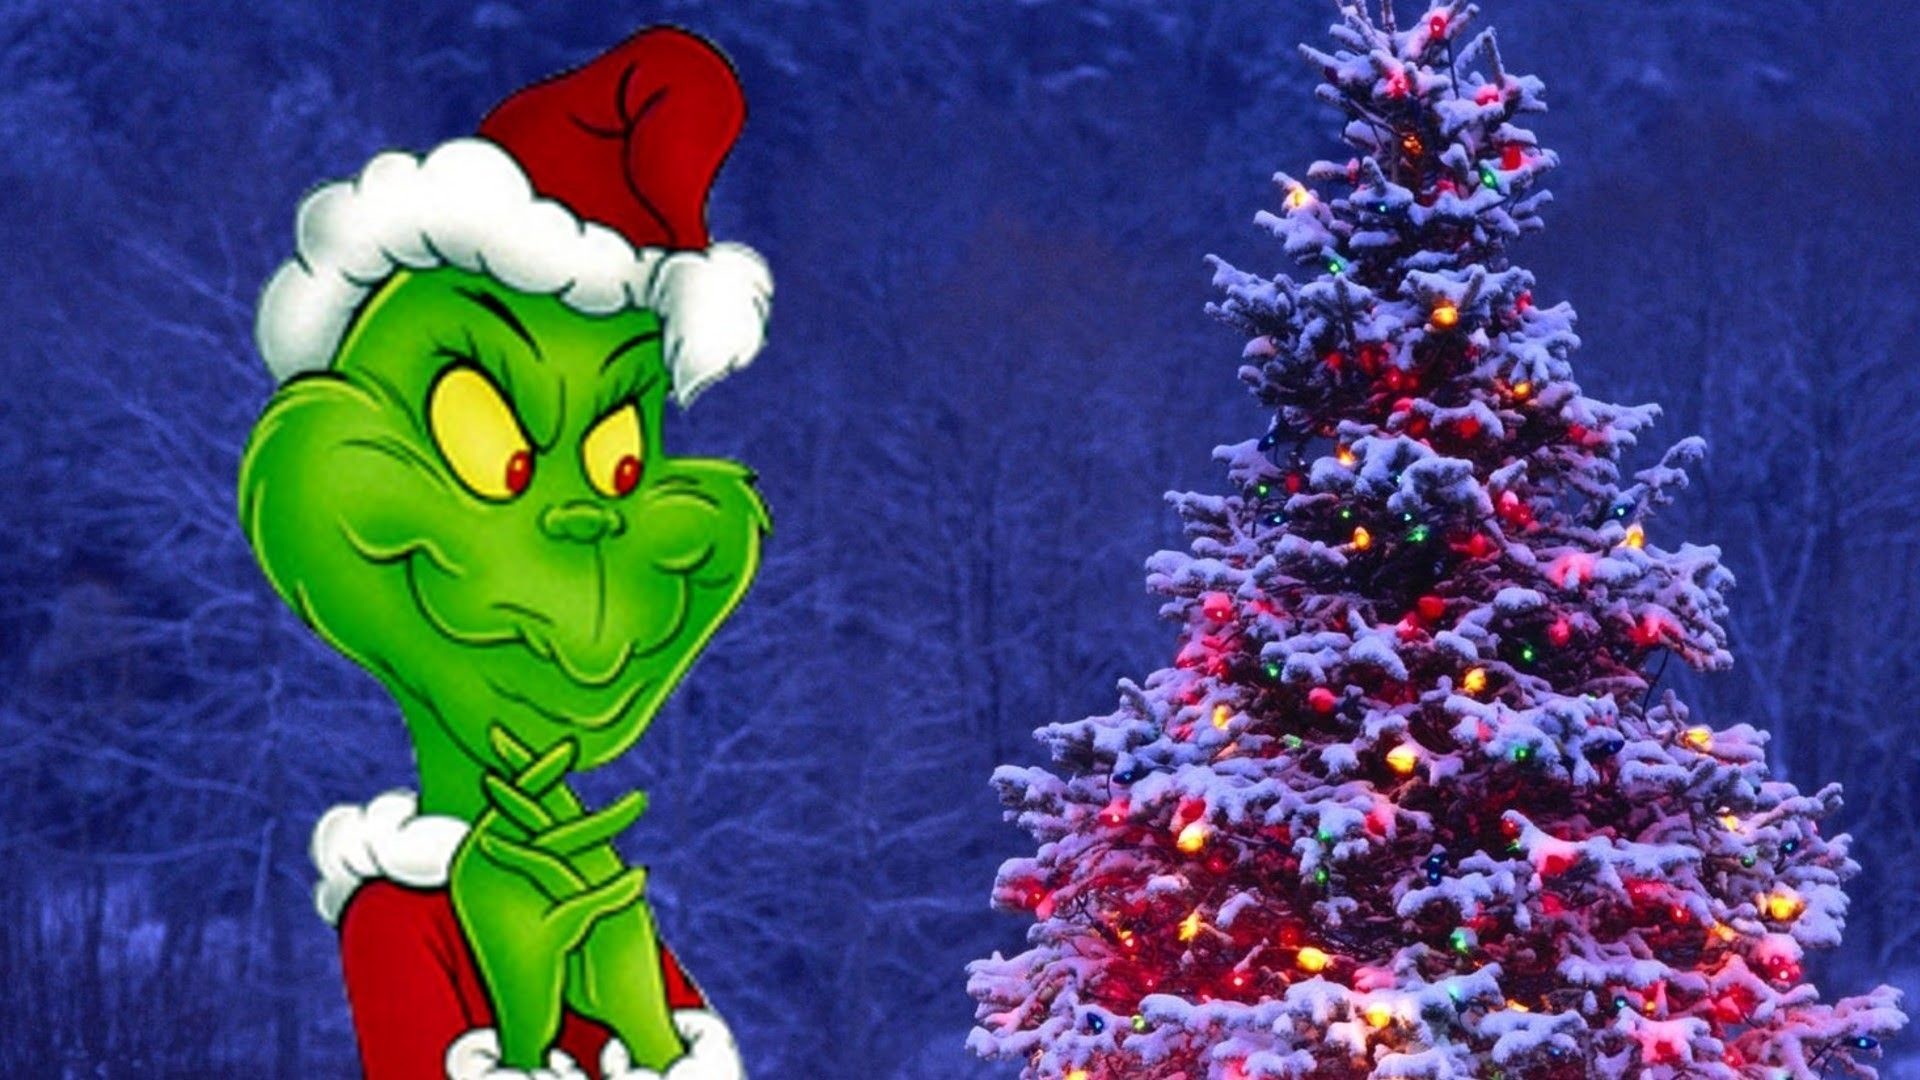 1920x1080 1192x670 How The Grinch Stole Christmas Wallpaper - Shared by Stacey #61598  ...">